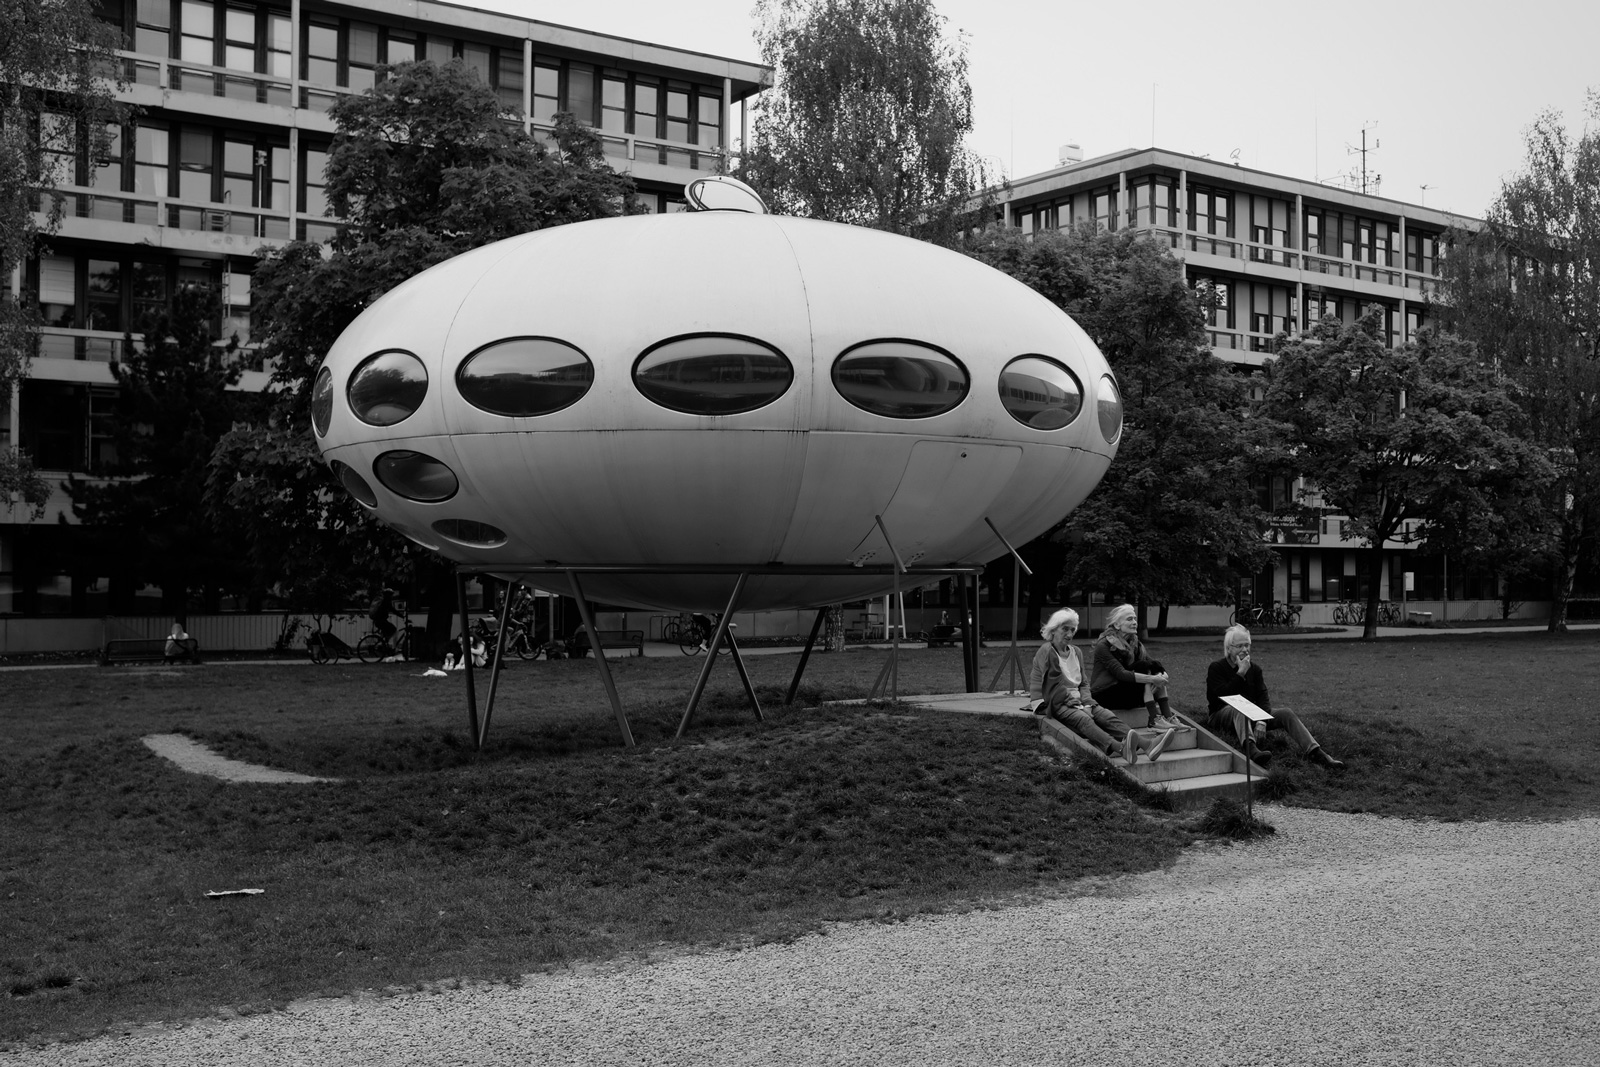 UFO-like house; a white capsule with round windows, with small people in front of it